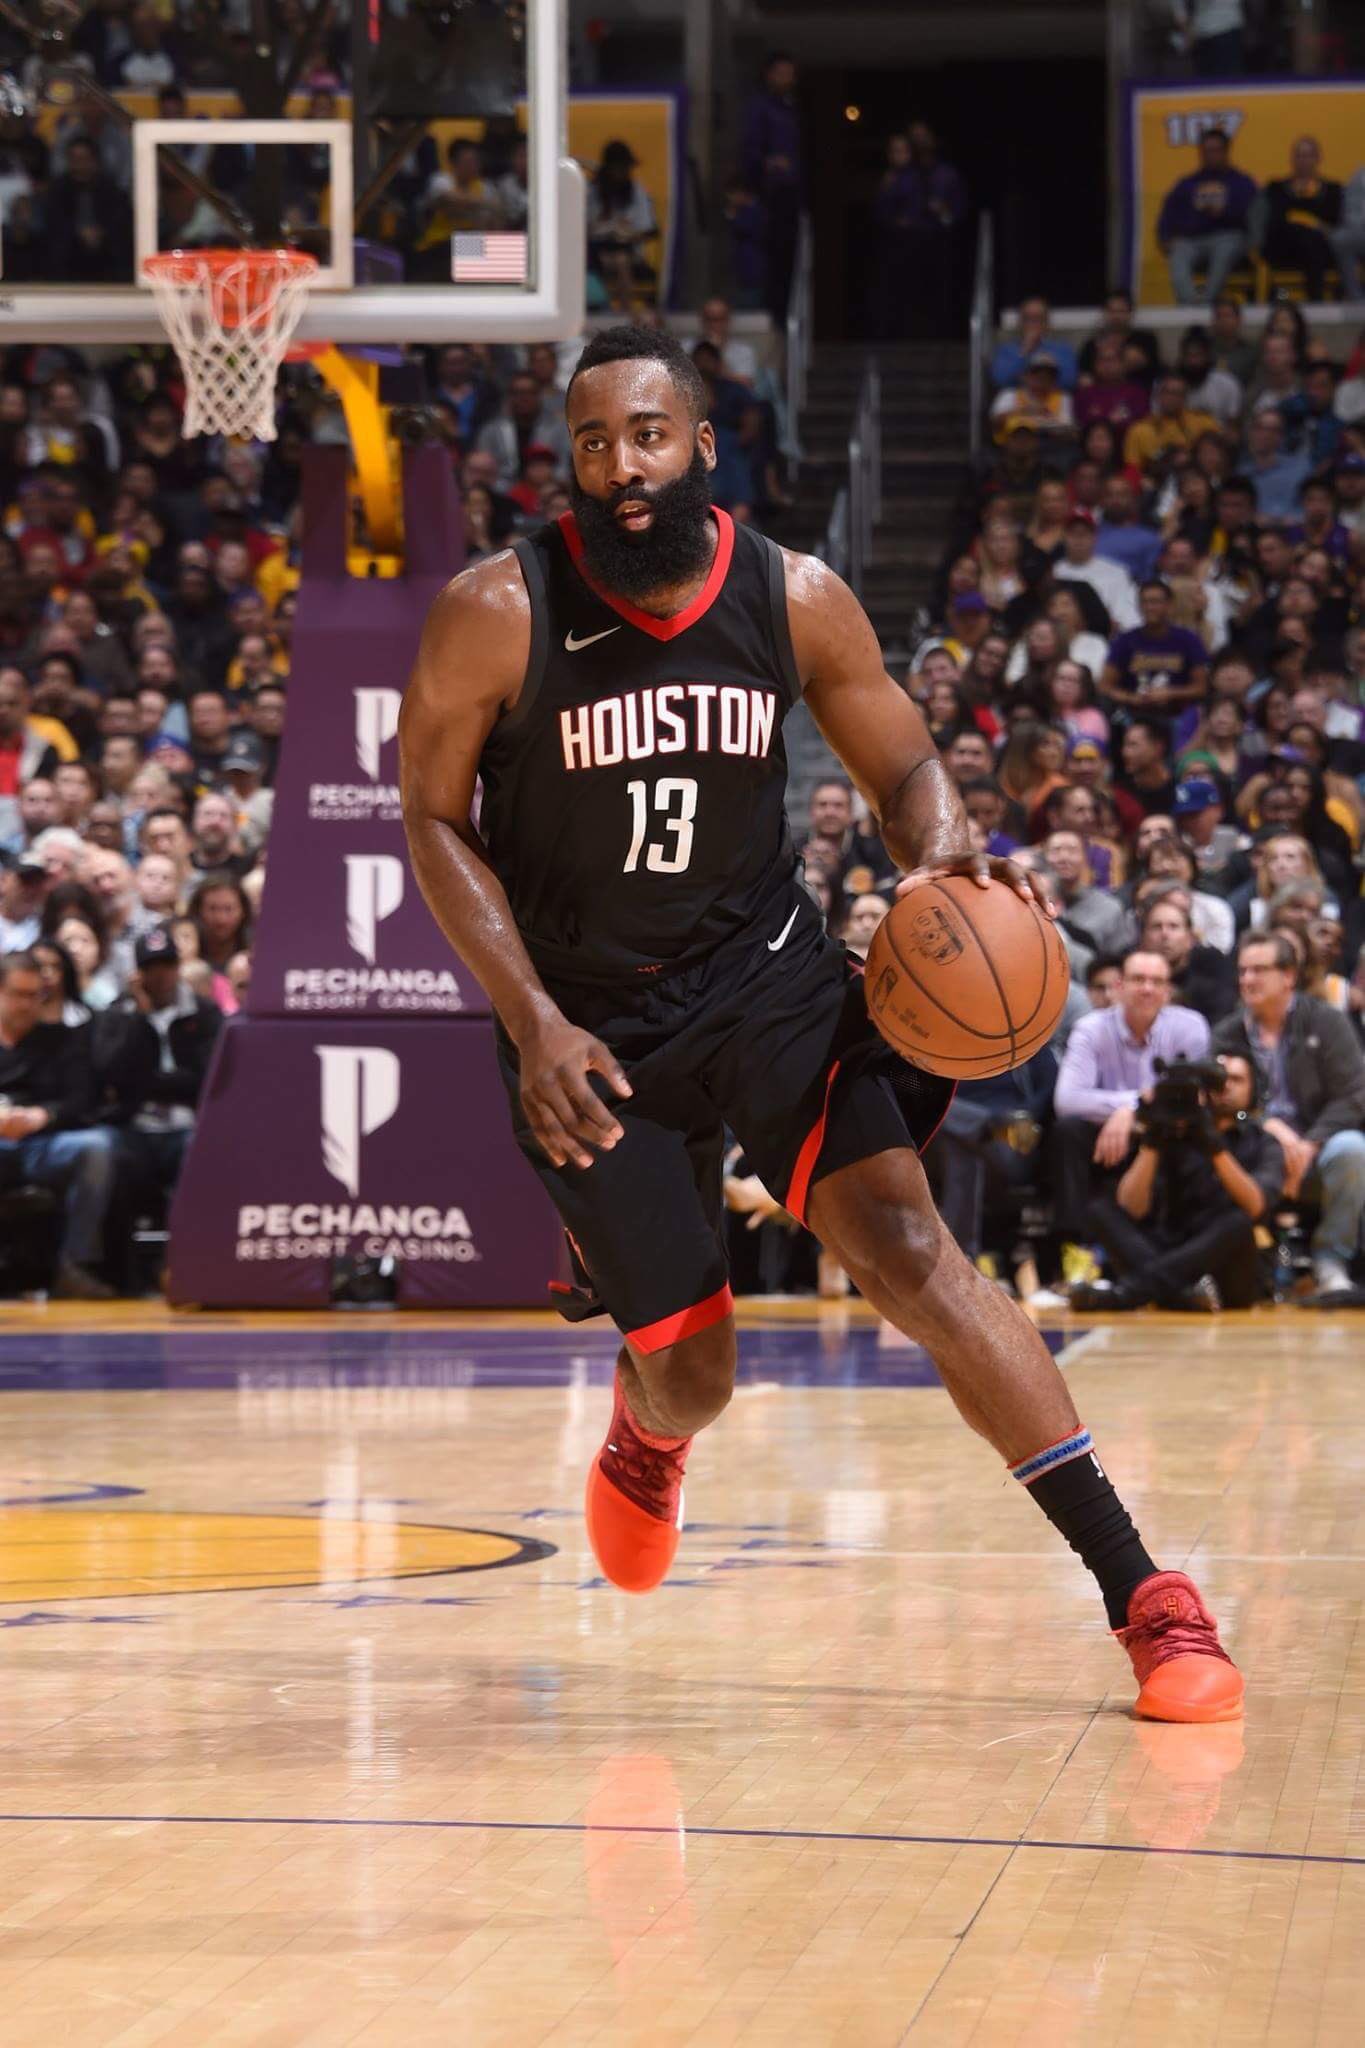 James Harden Named Western Conference Player of the Week